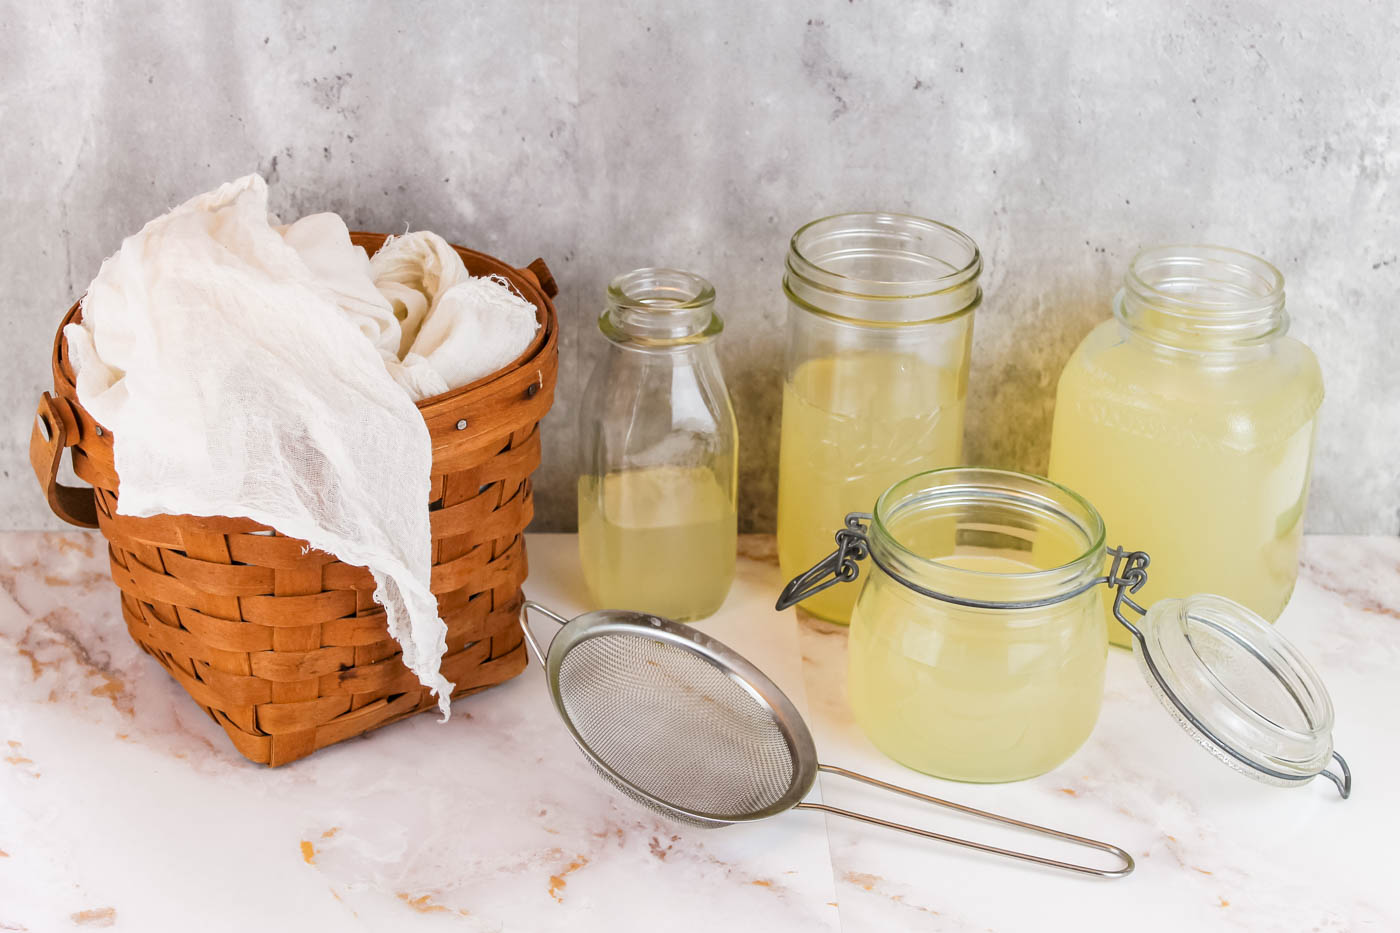 basket filled with cheesecloth sitting next to four jars filled with liquid whey